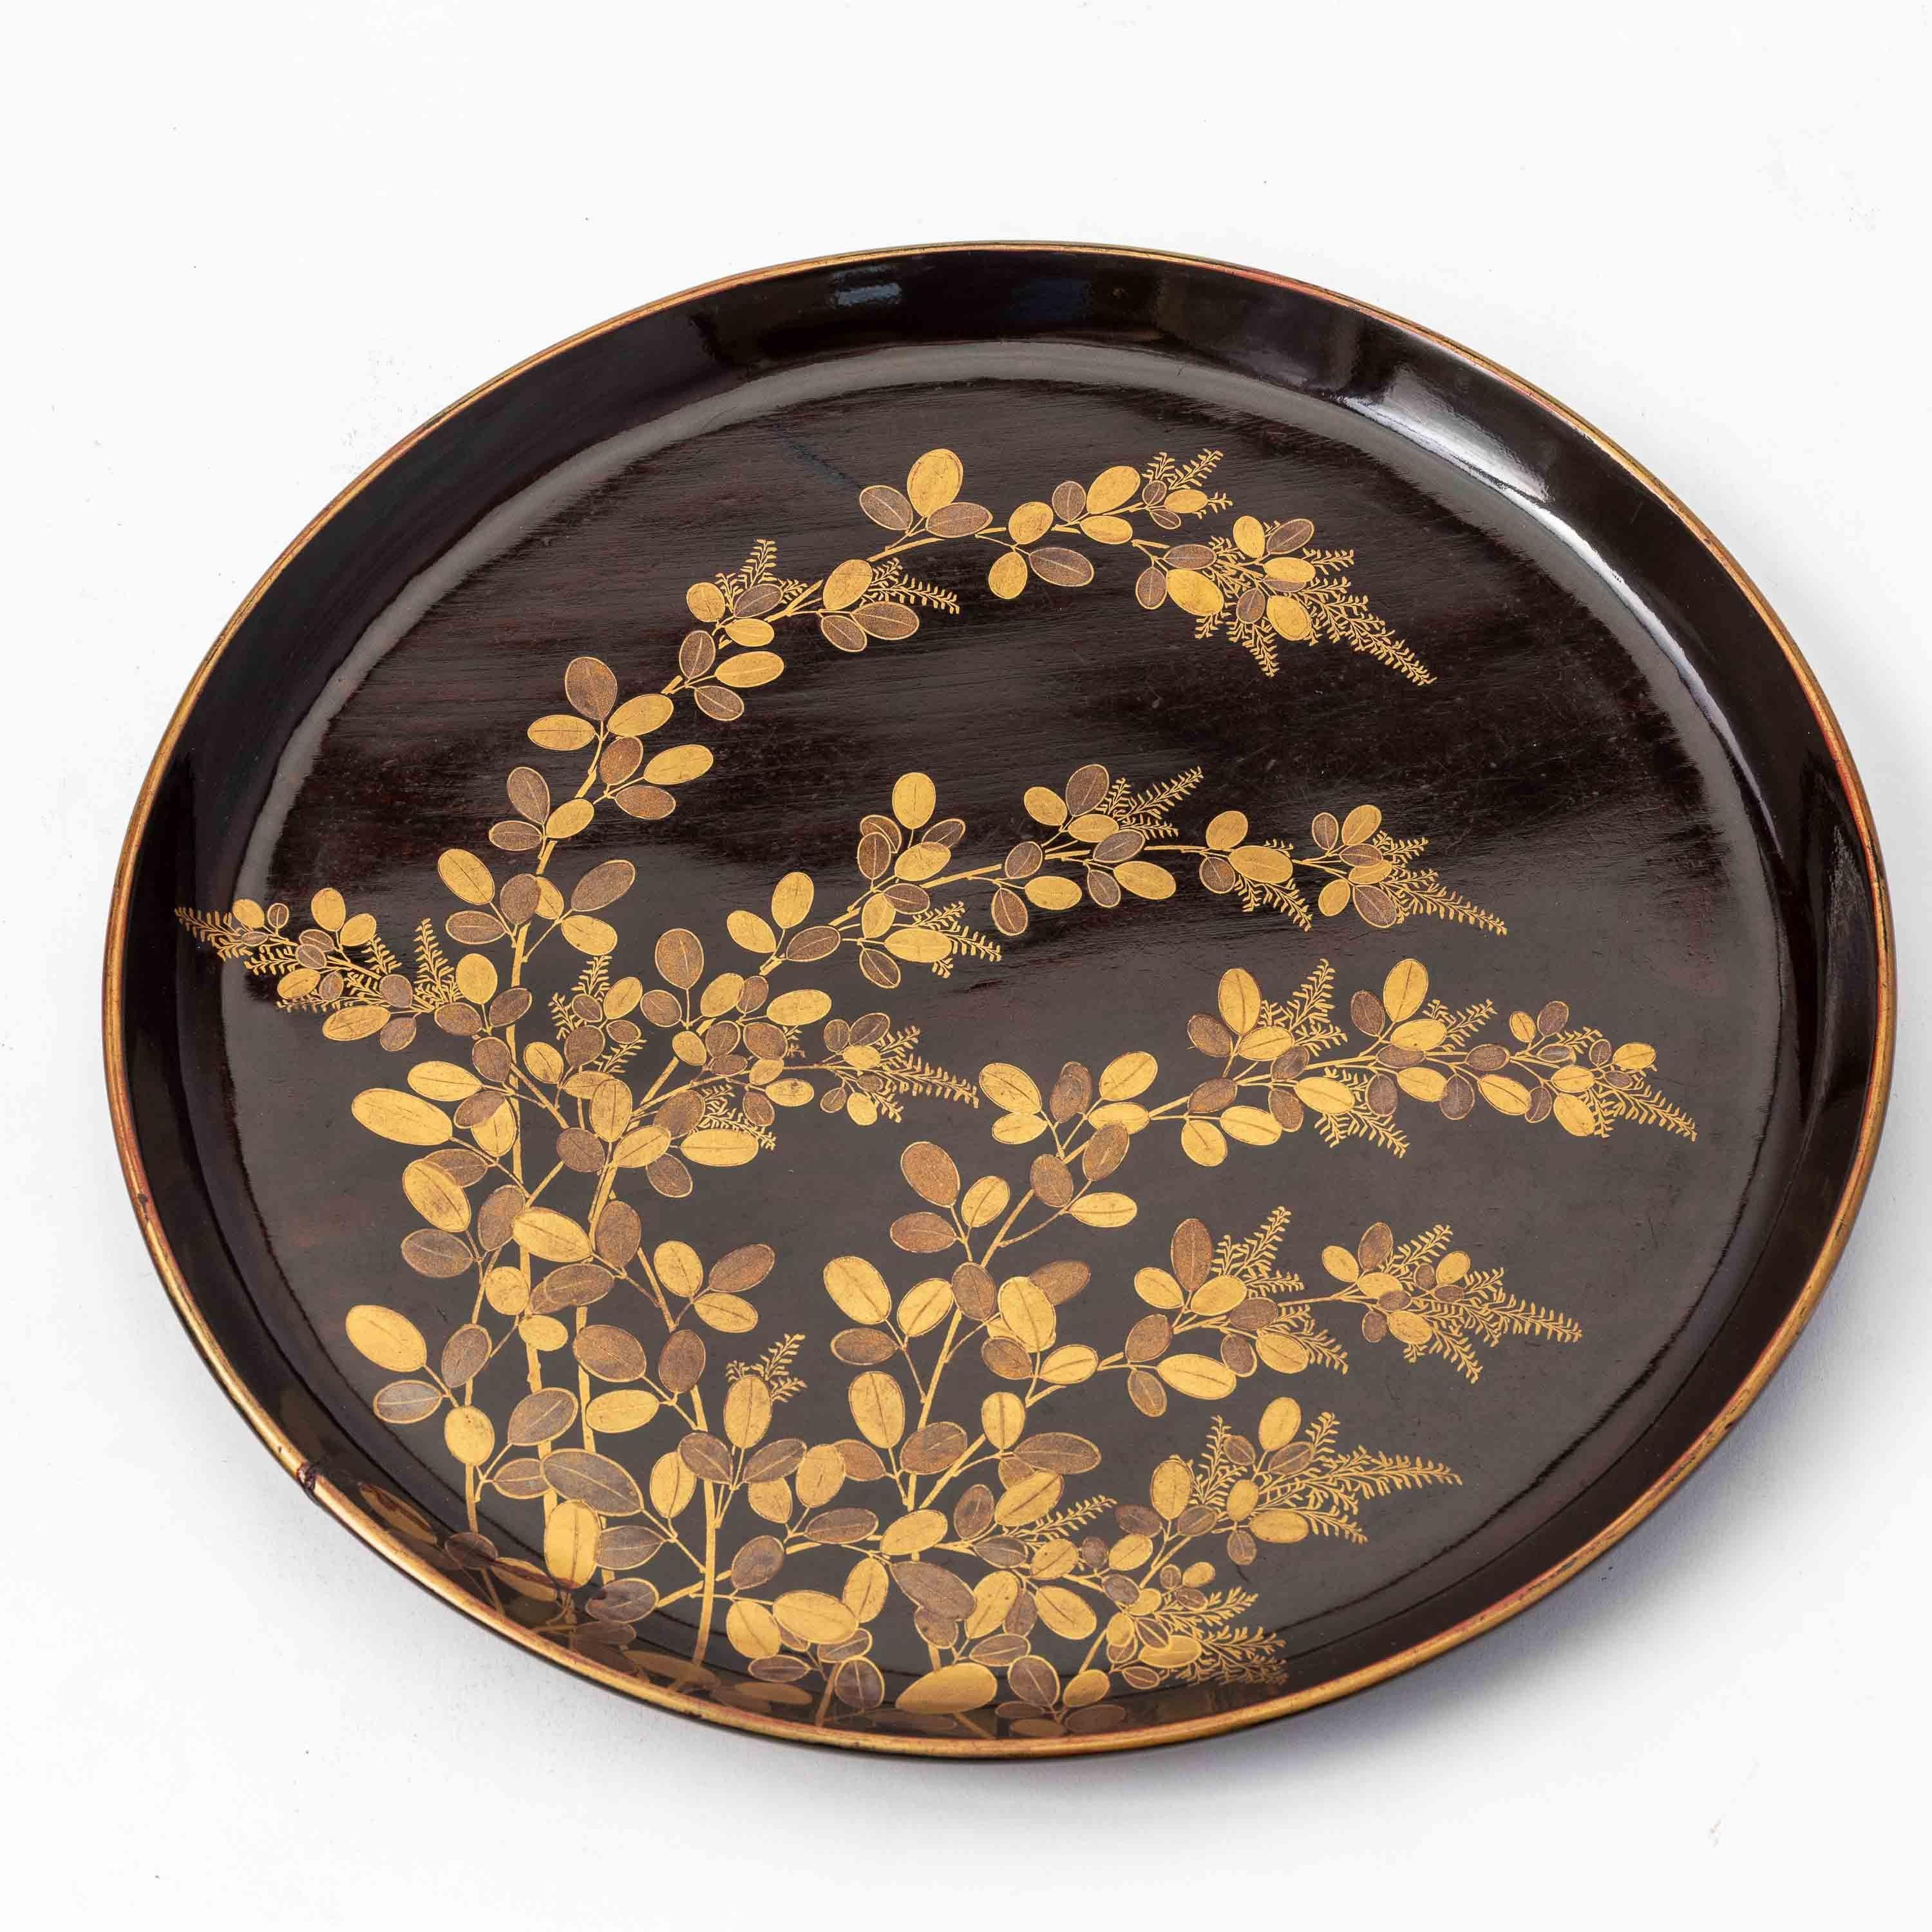 Set of 9 Antique Japanese Circular Lacquer Trays with Botanical Designs in Gold 2